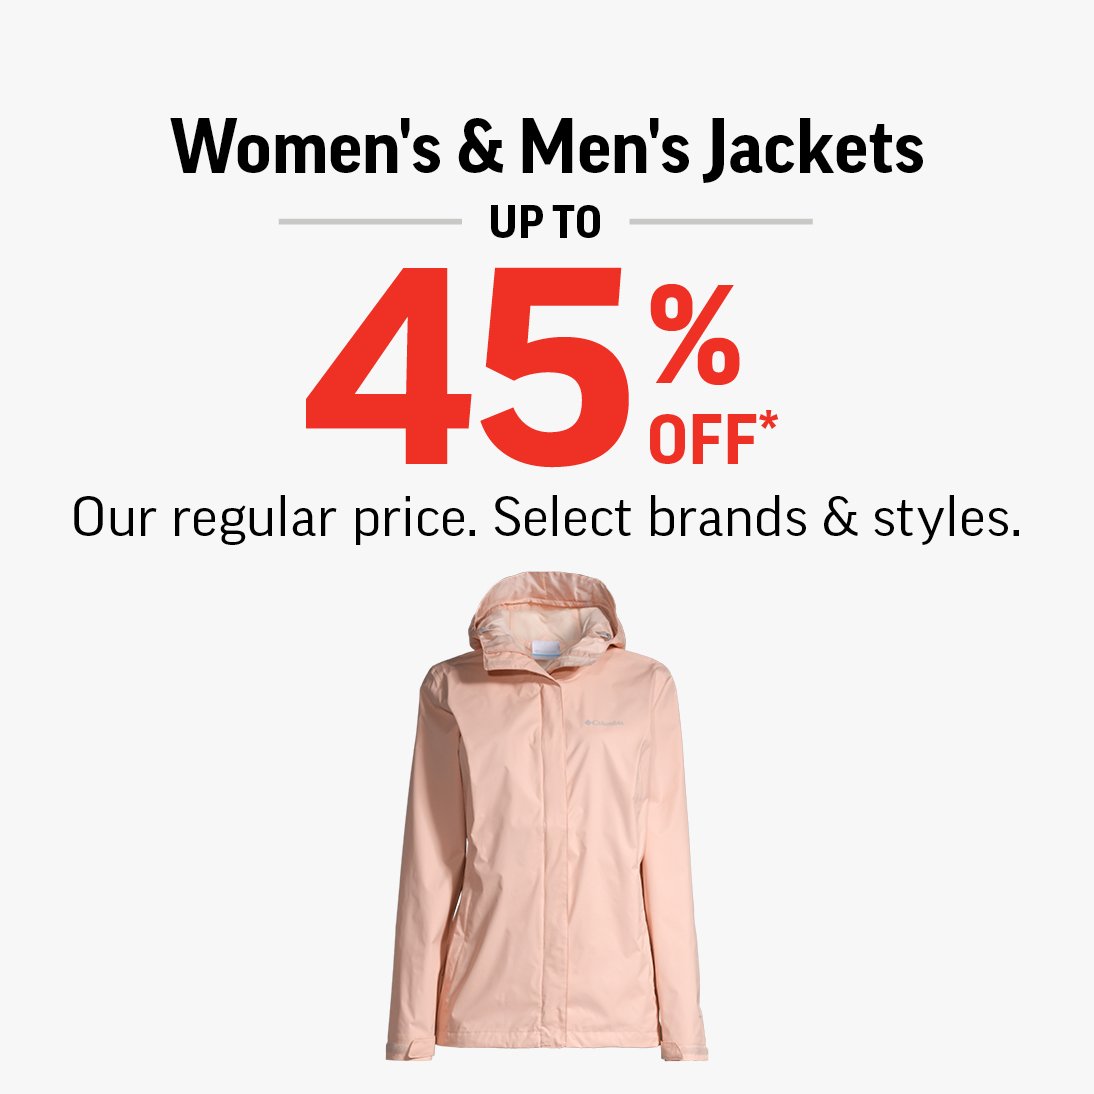 WOMEN'S & MEN'S JACKETS UP TO 45% OFF